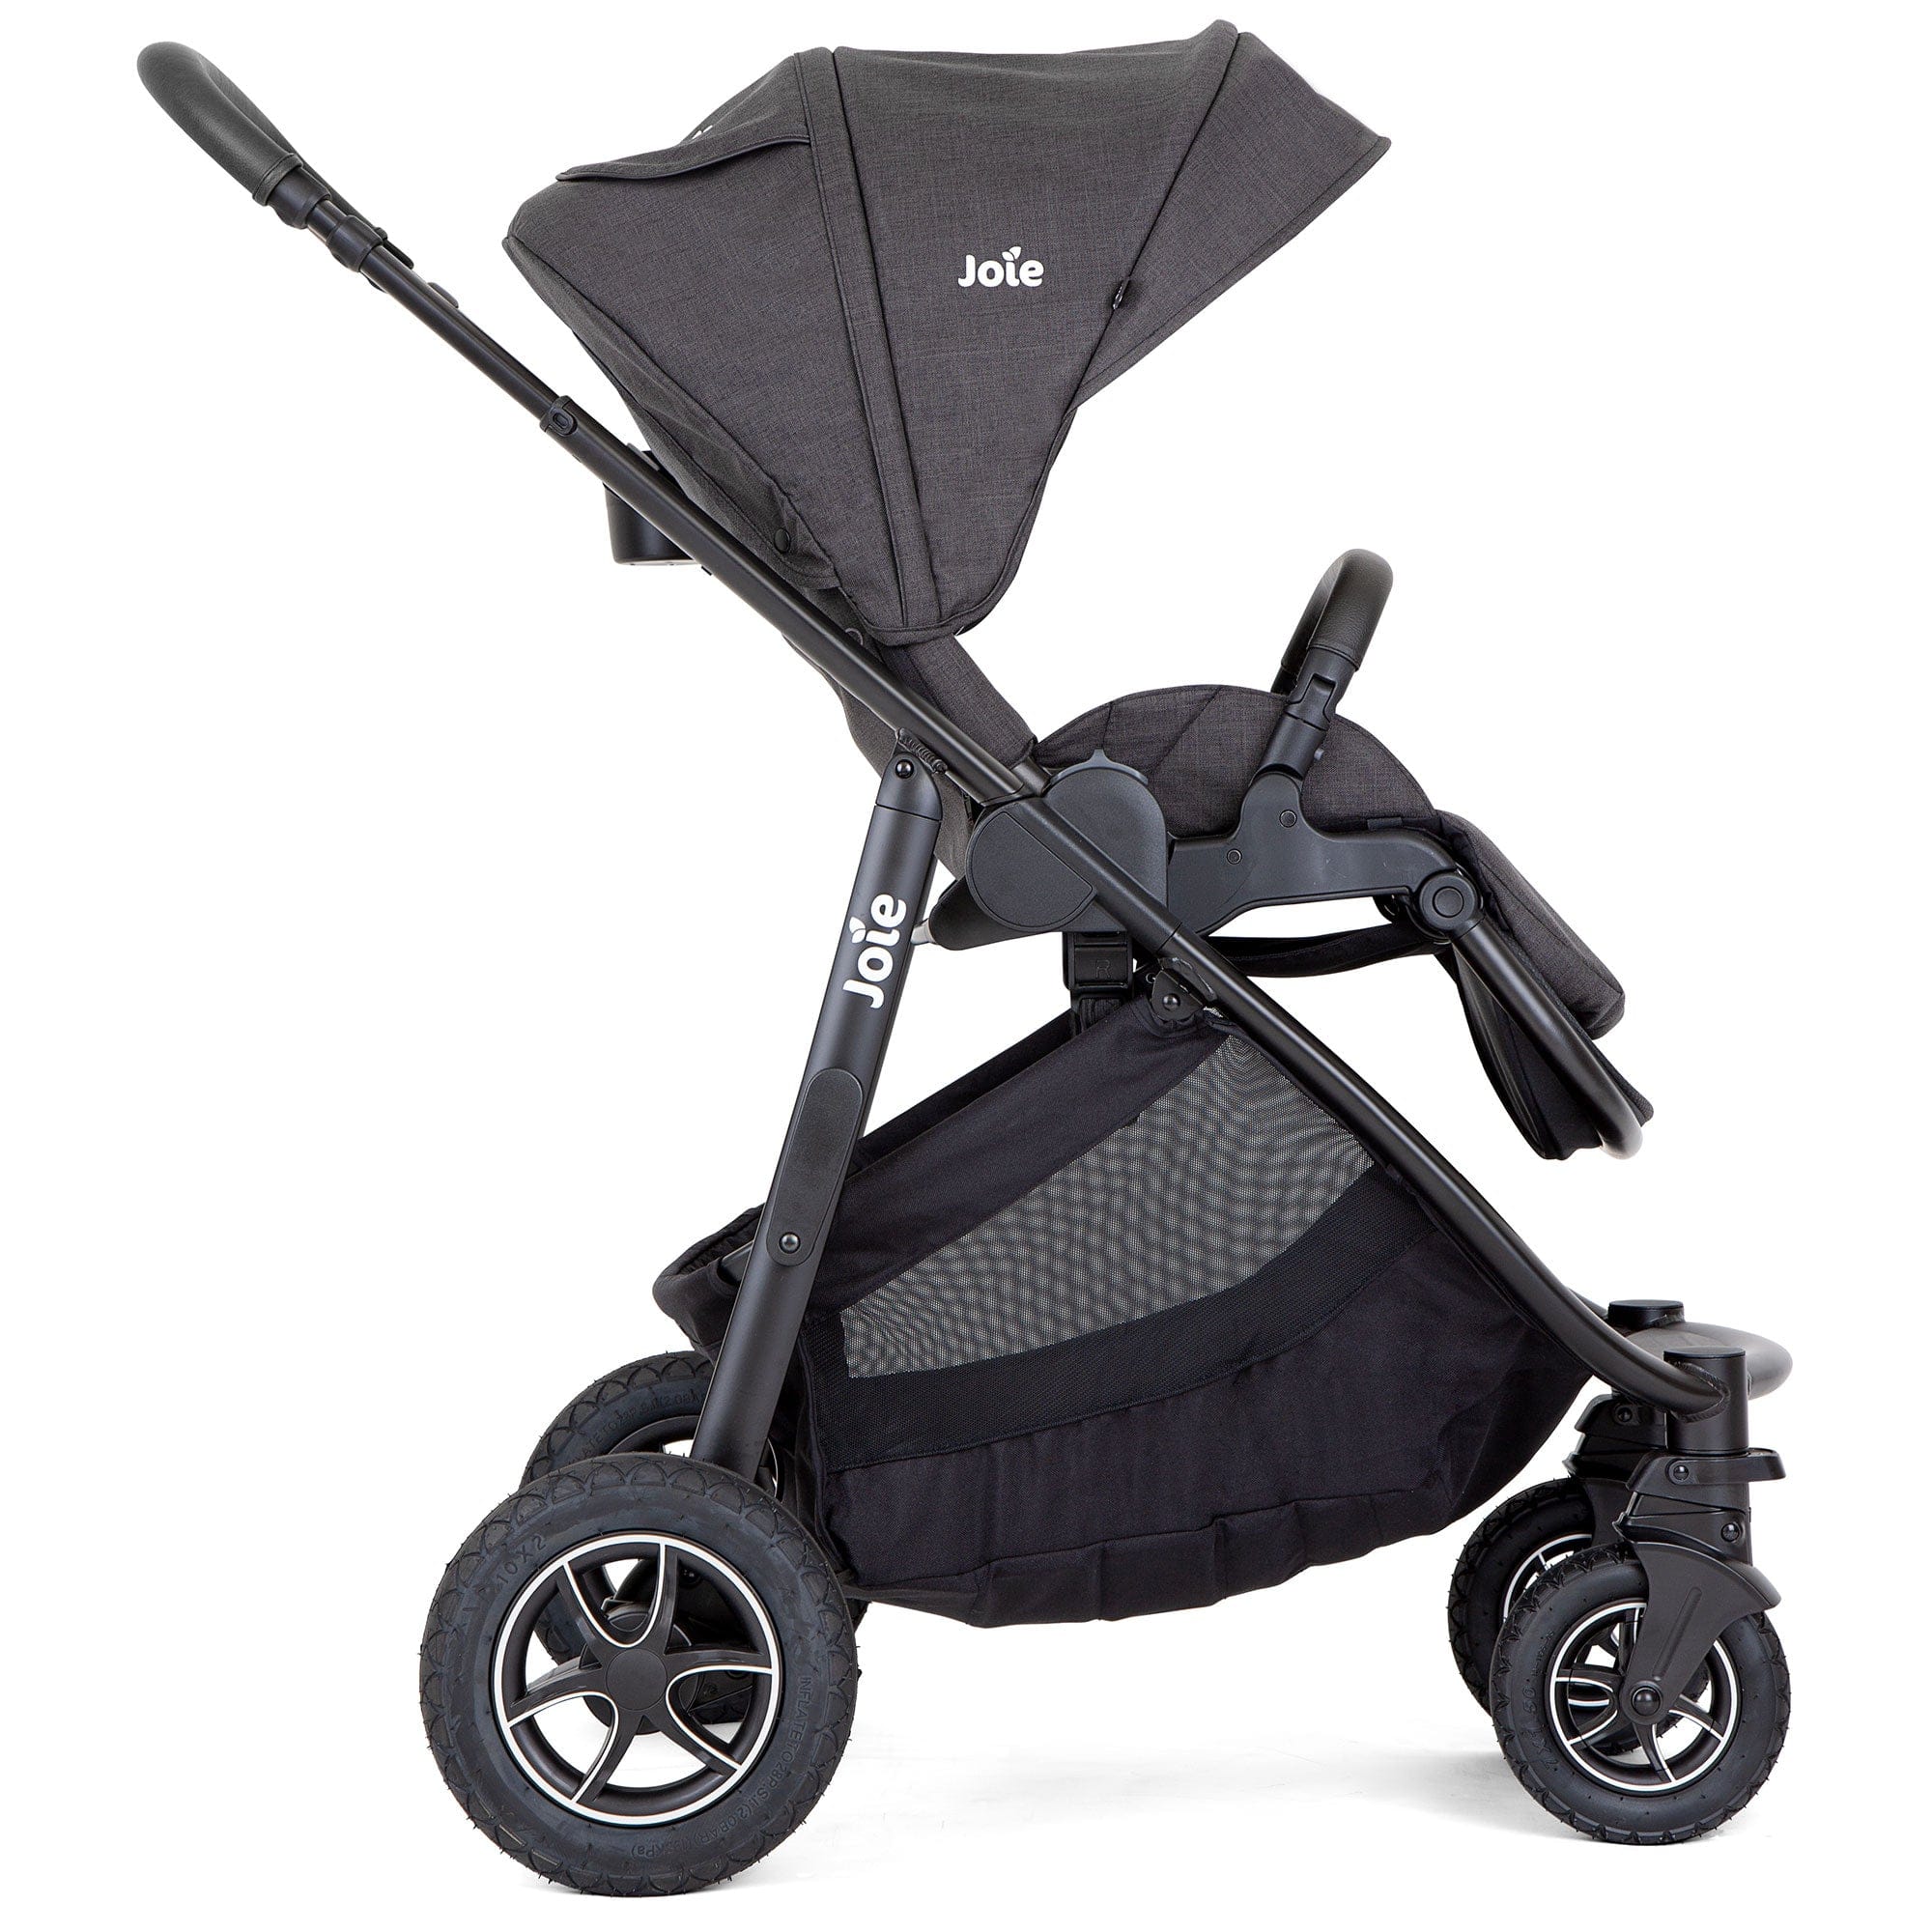 Joie Pushchairs & Buggies Joie Versatrax Stroller and Ramble XL Carrycot in Shale Z2BJVTRX1005UK